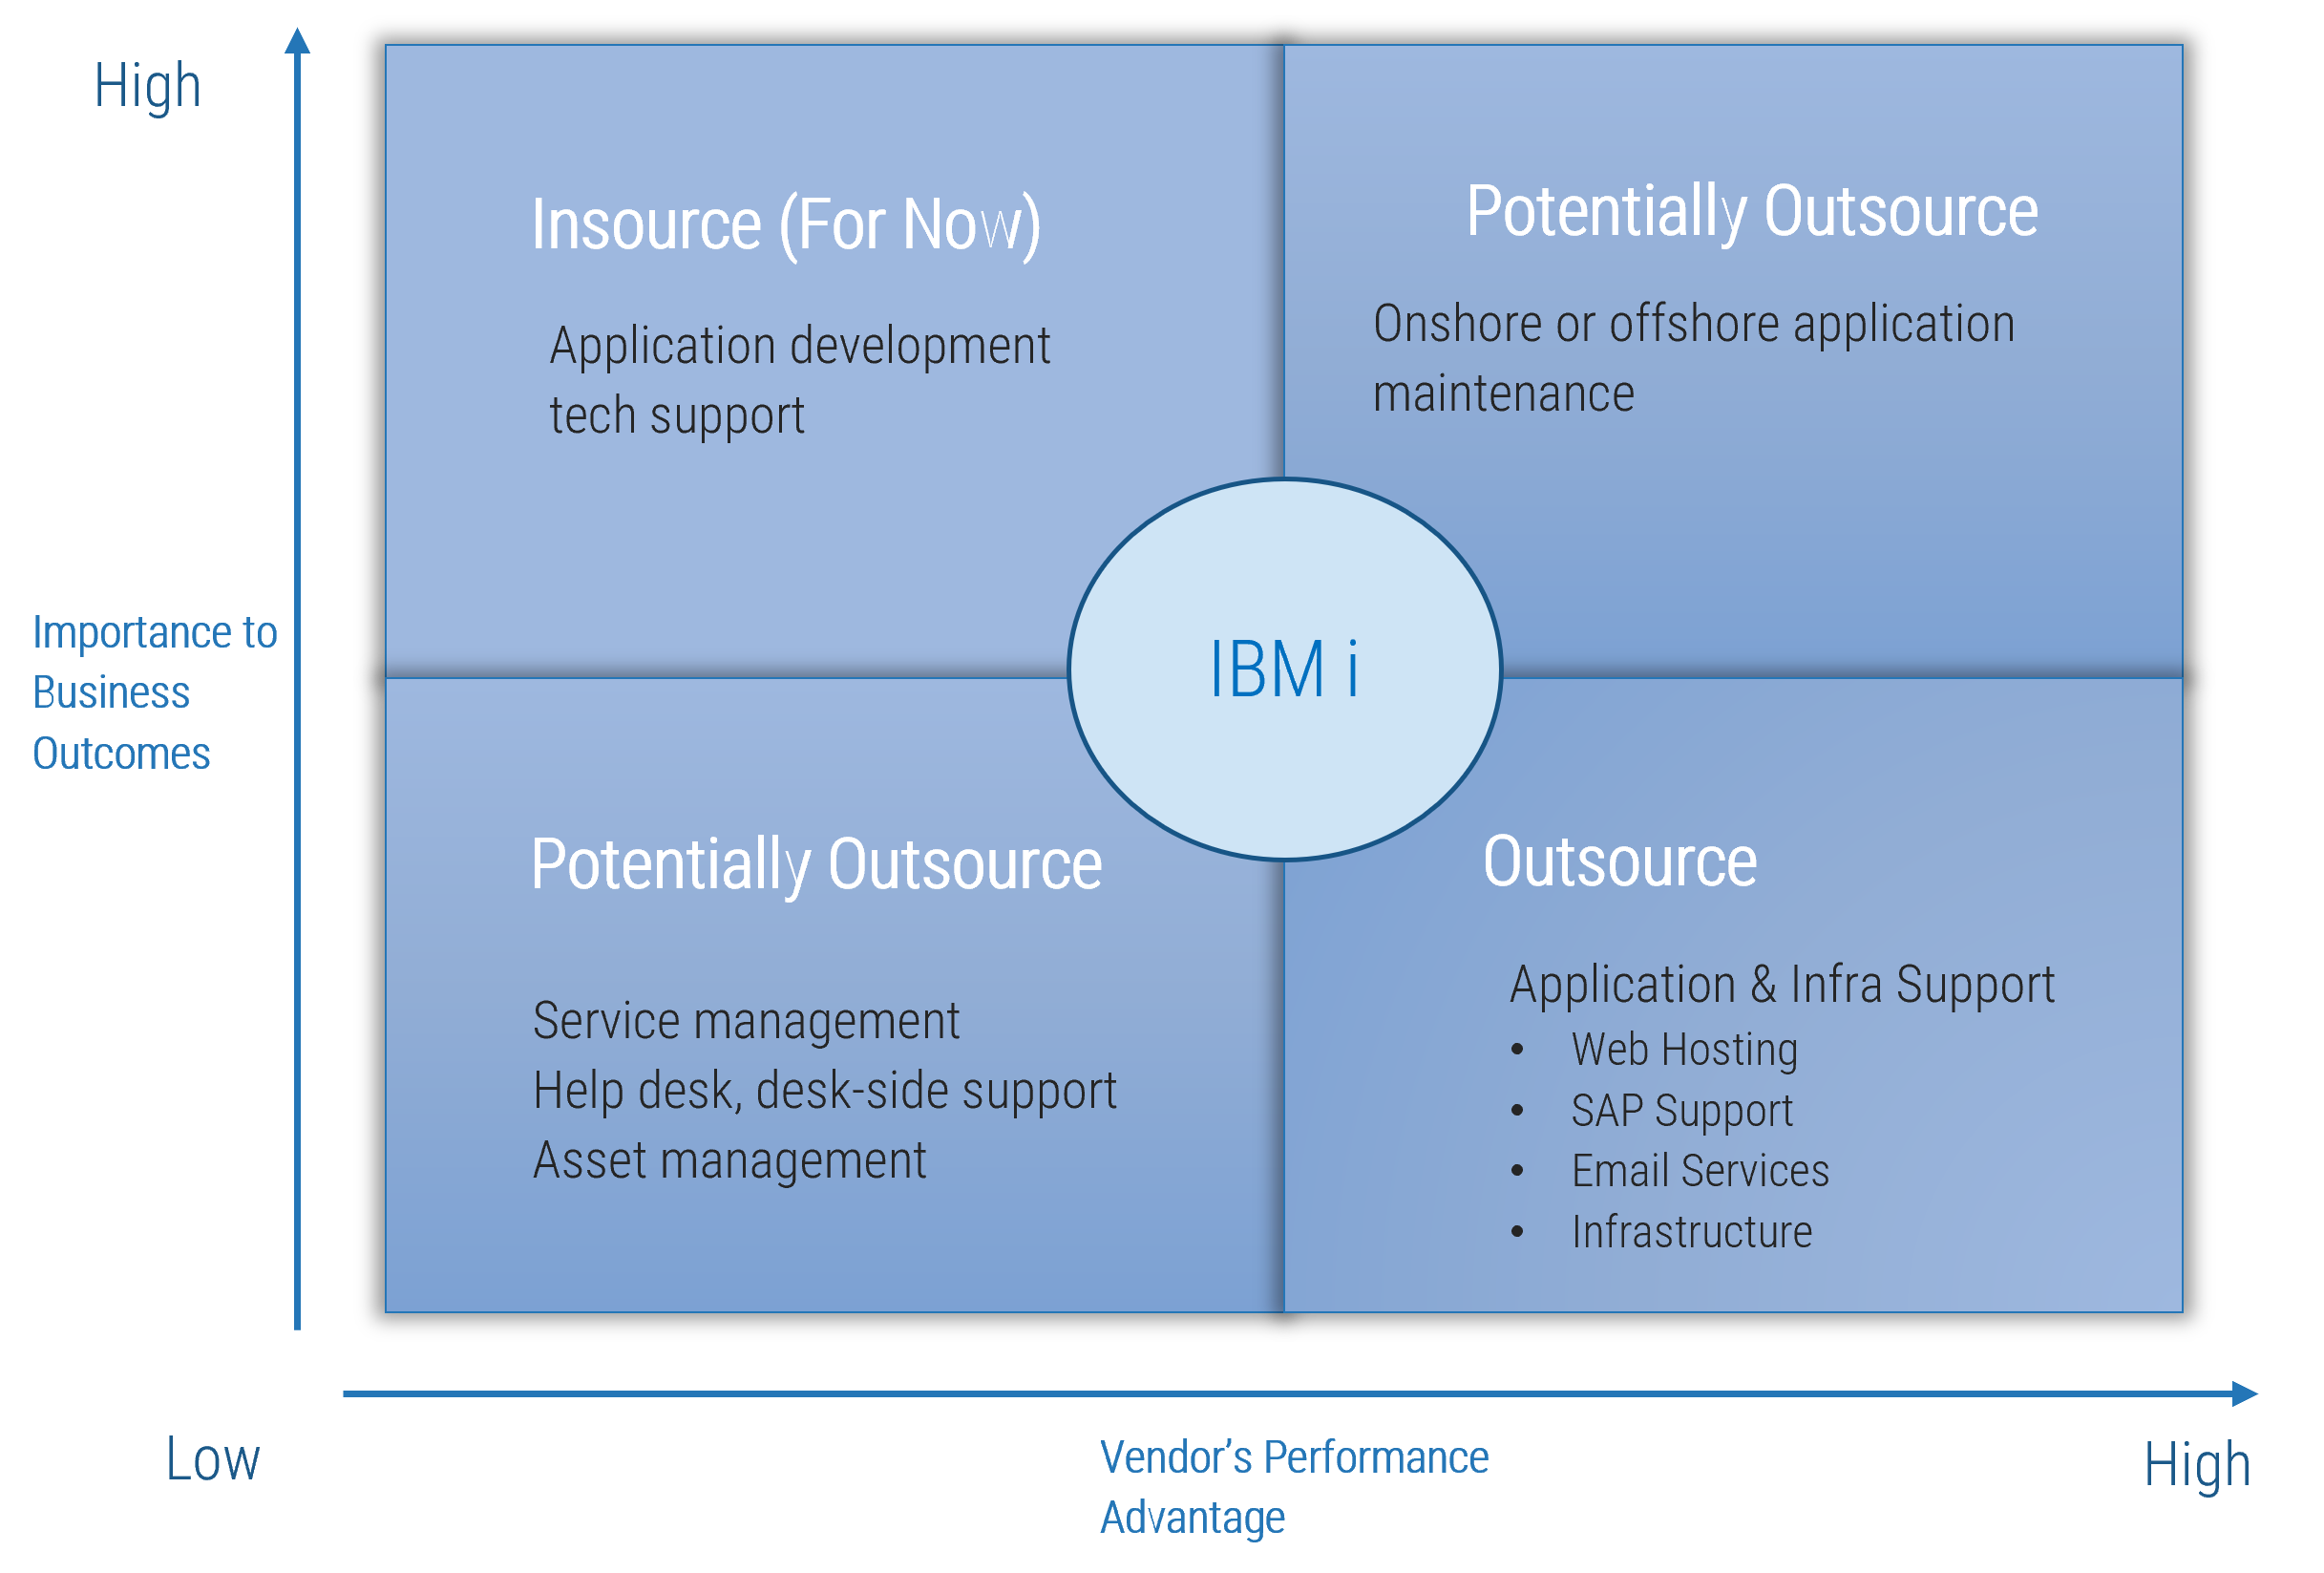 Map different 'IBM i' scenarios with axes 'Importance to Business Outcomes - Low to High' and 'Vendor’s Performance Advantage - Low to High'. Quadrant labels are '[LI/LA] Potentially Outsource: Service management, Help desk, desk-side support, Asset management', '[LI/HA] Outsource: Application & Infra Support, Web Hosting, SAP Support, Email Services, Infrastructure', '[HI/LA] Insource (For Now): Application development tech support', and '[HI/HA] Potentially Outsource: Onshore or offshore application maintenance'.